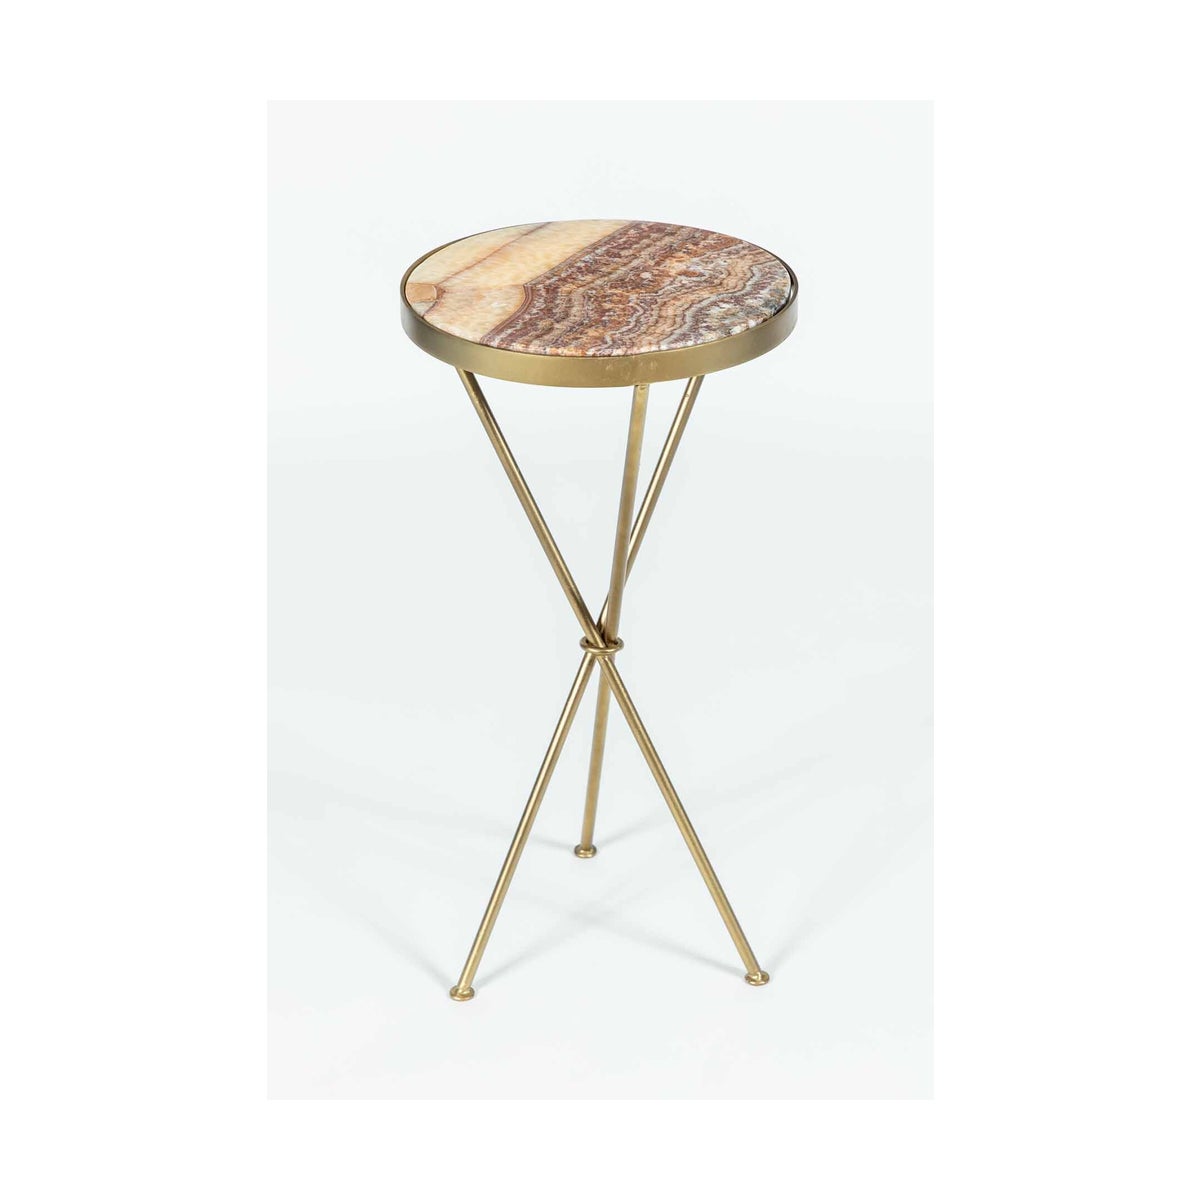 Ella Accent Table in Antique Brass with Red Onyx